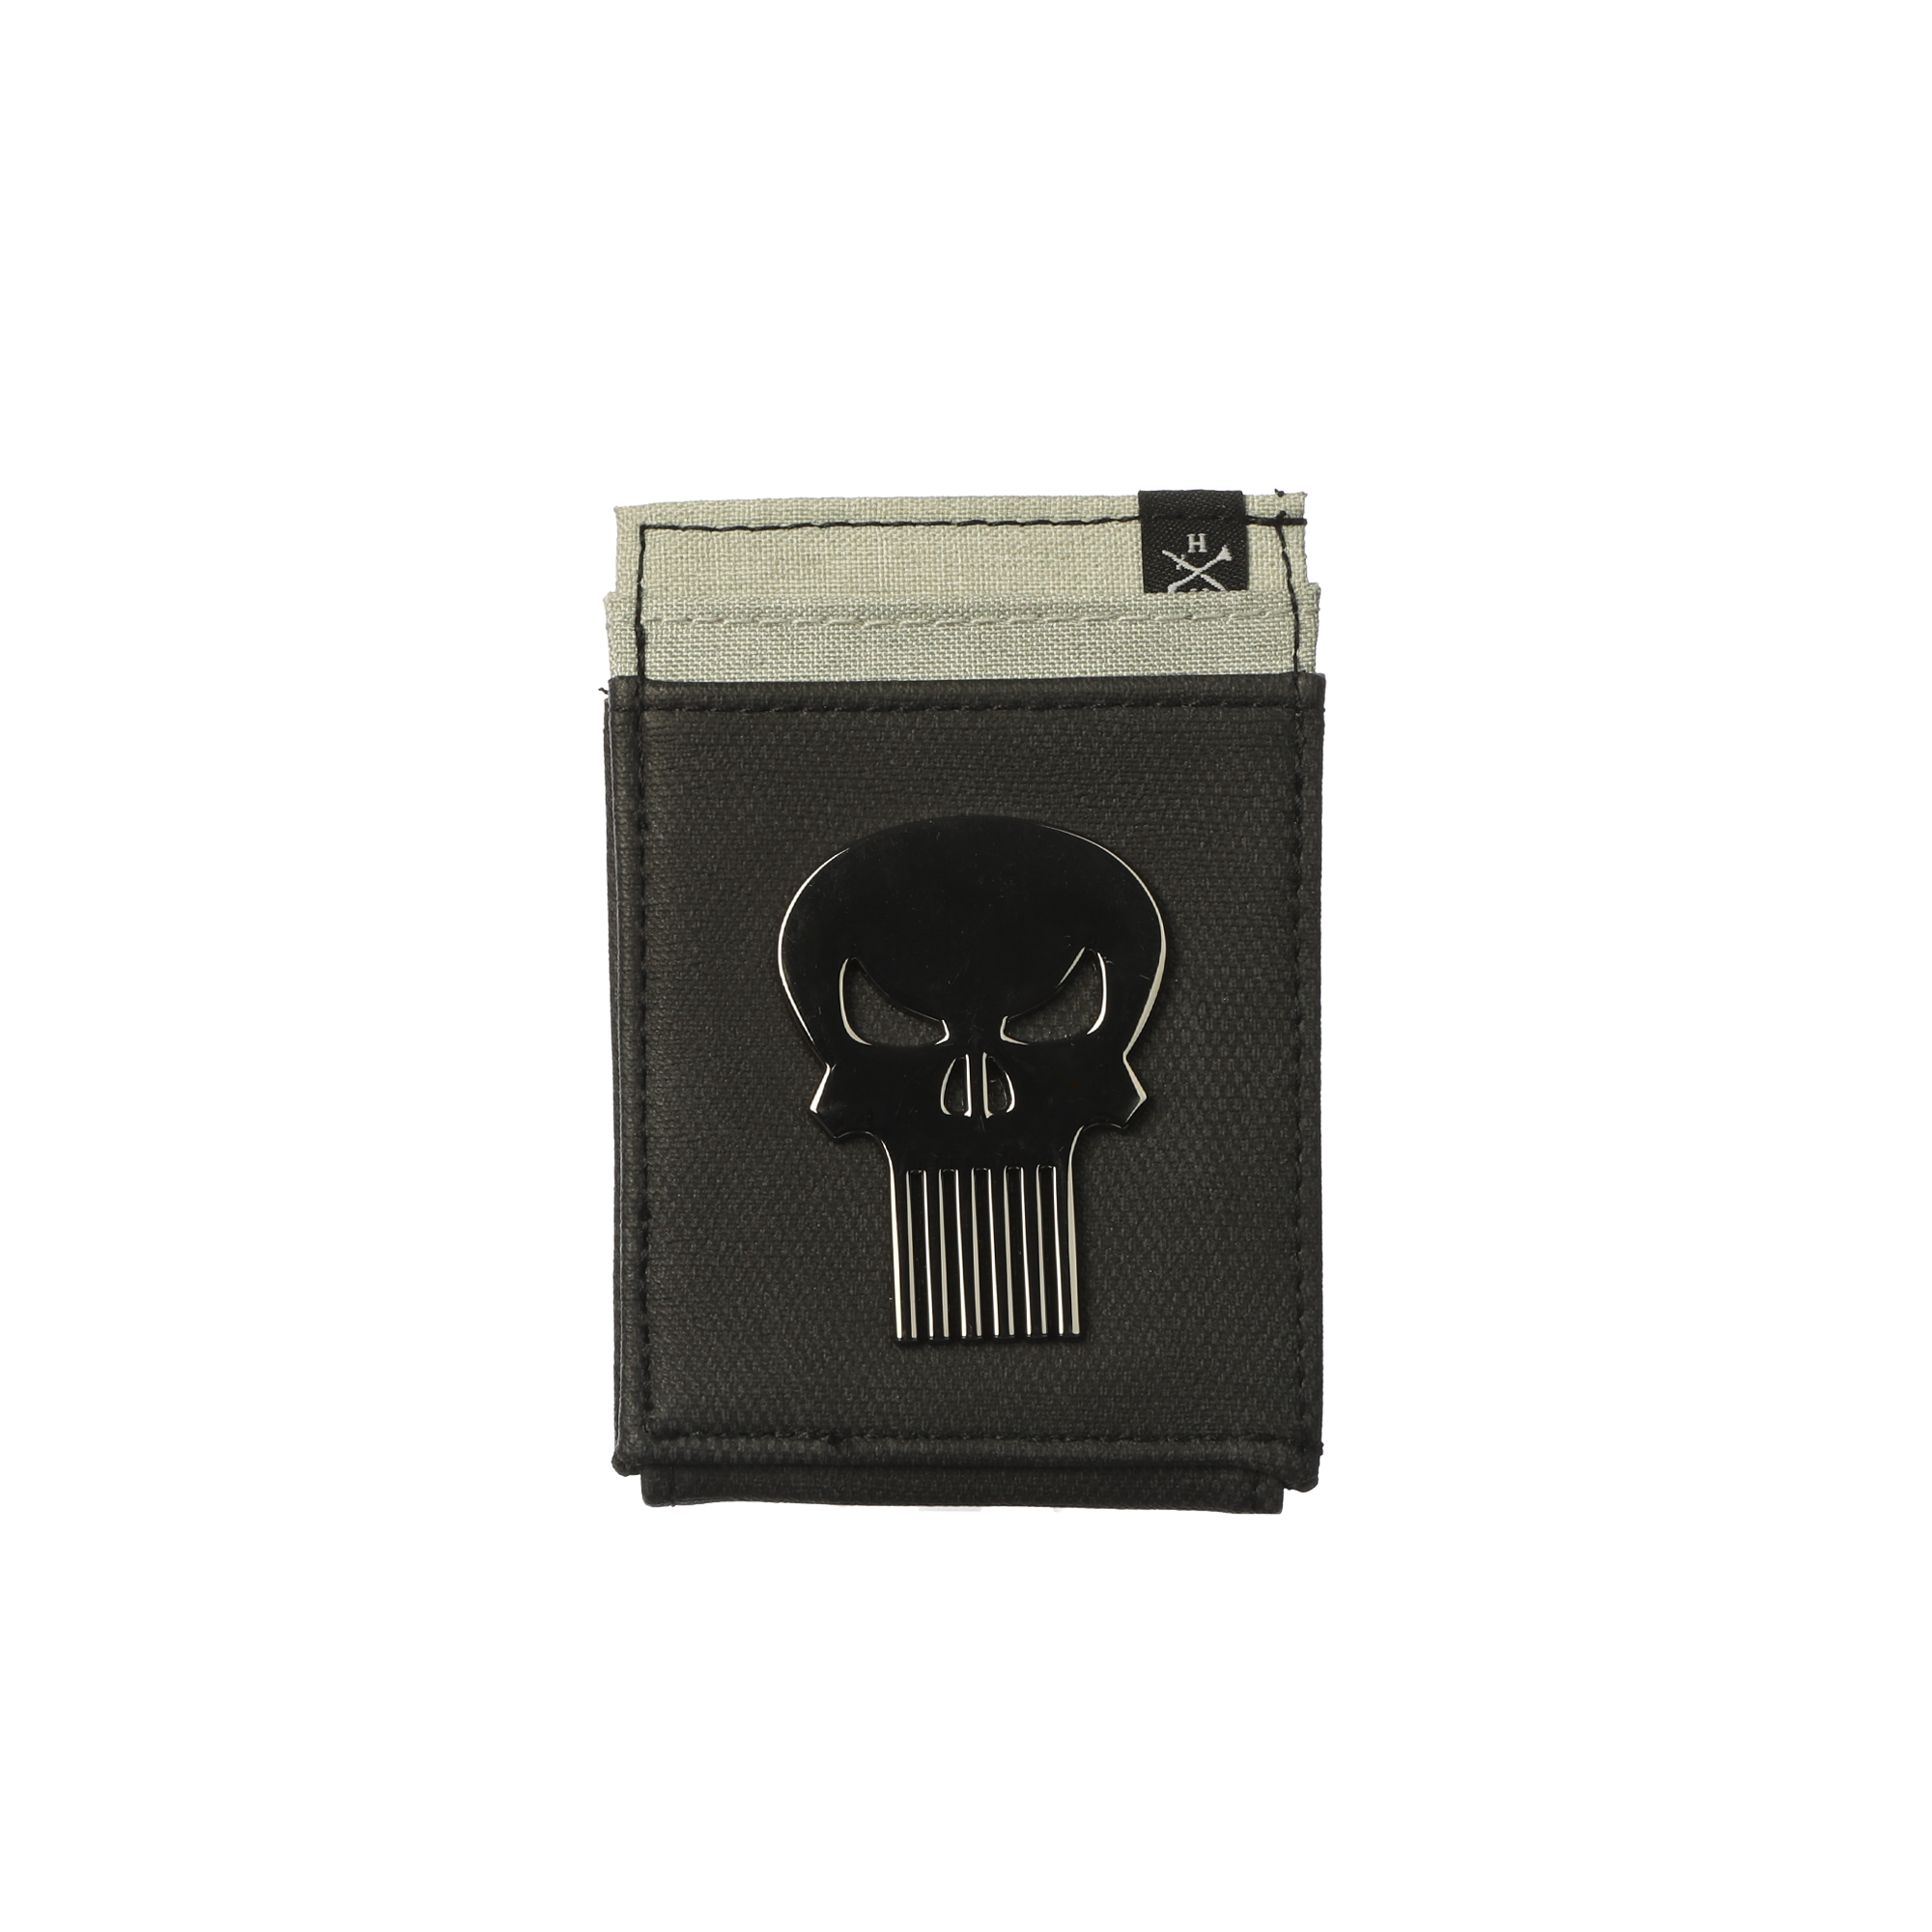 The Punisher Money Clip Wallet